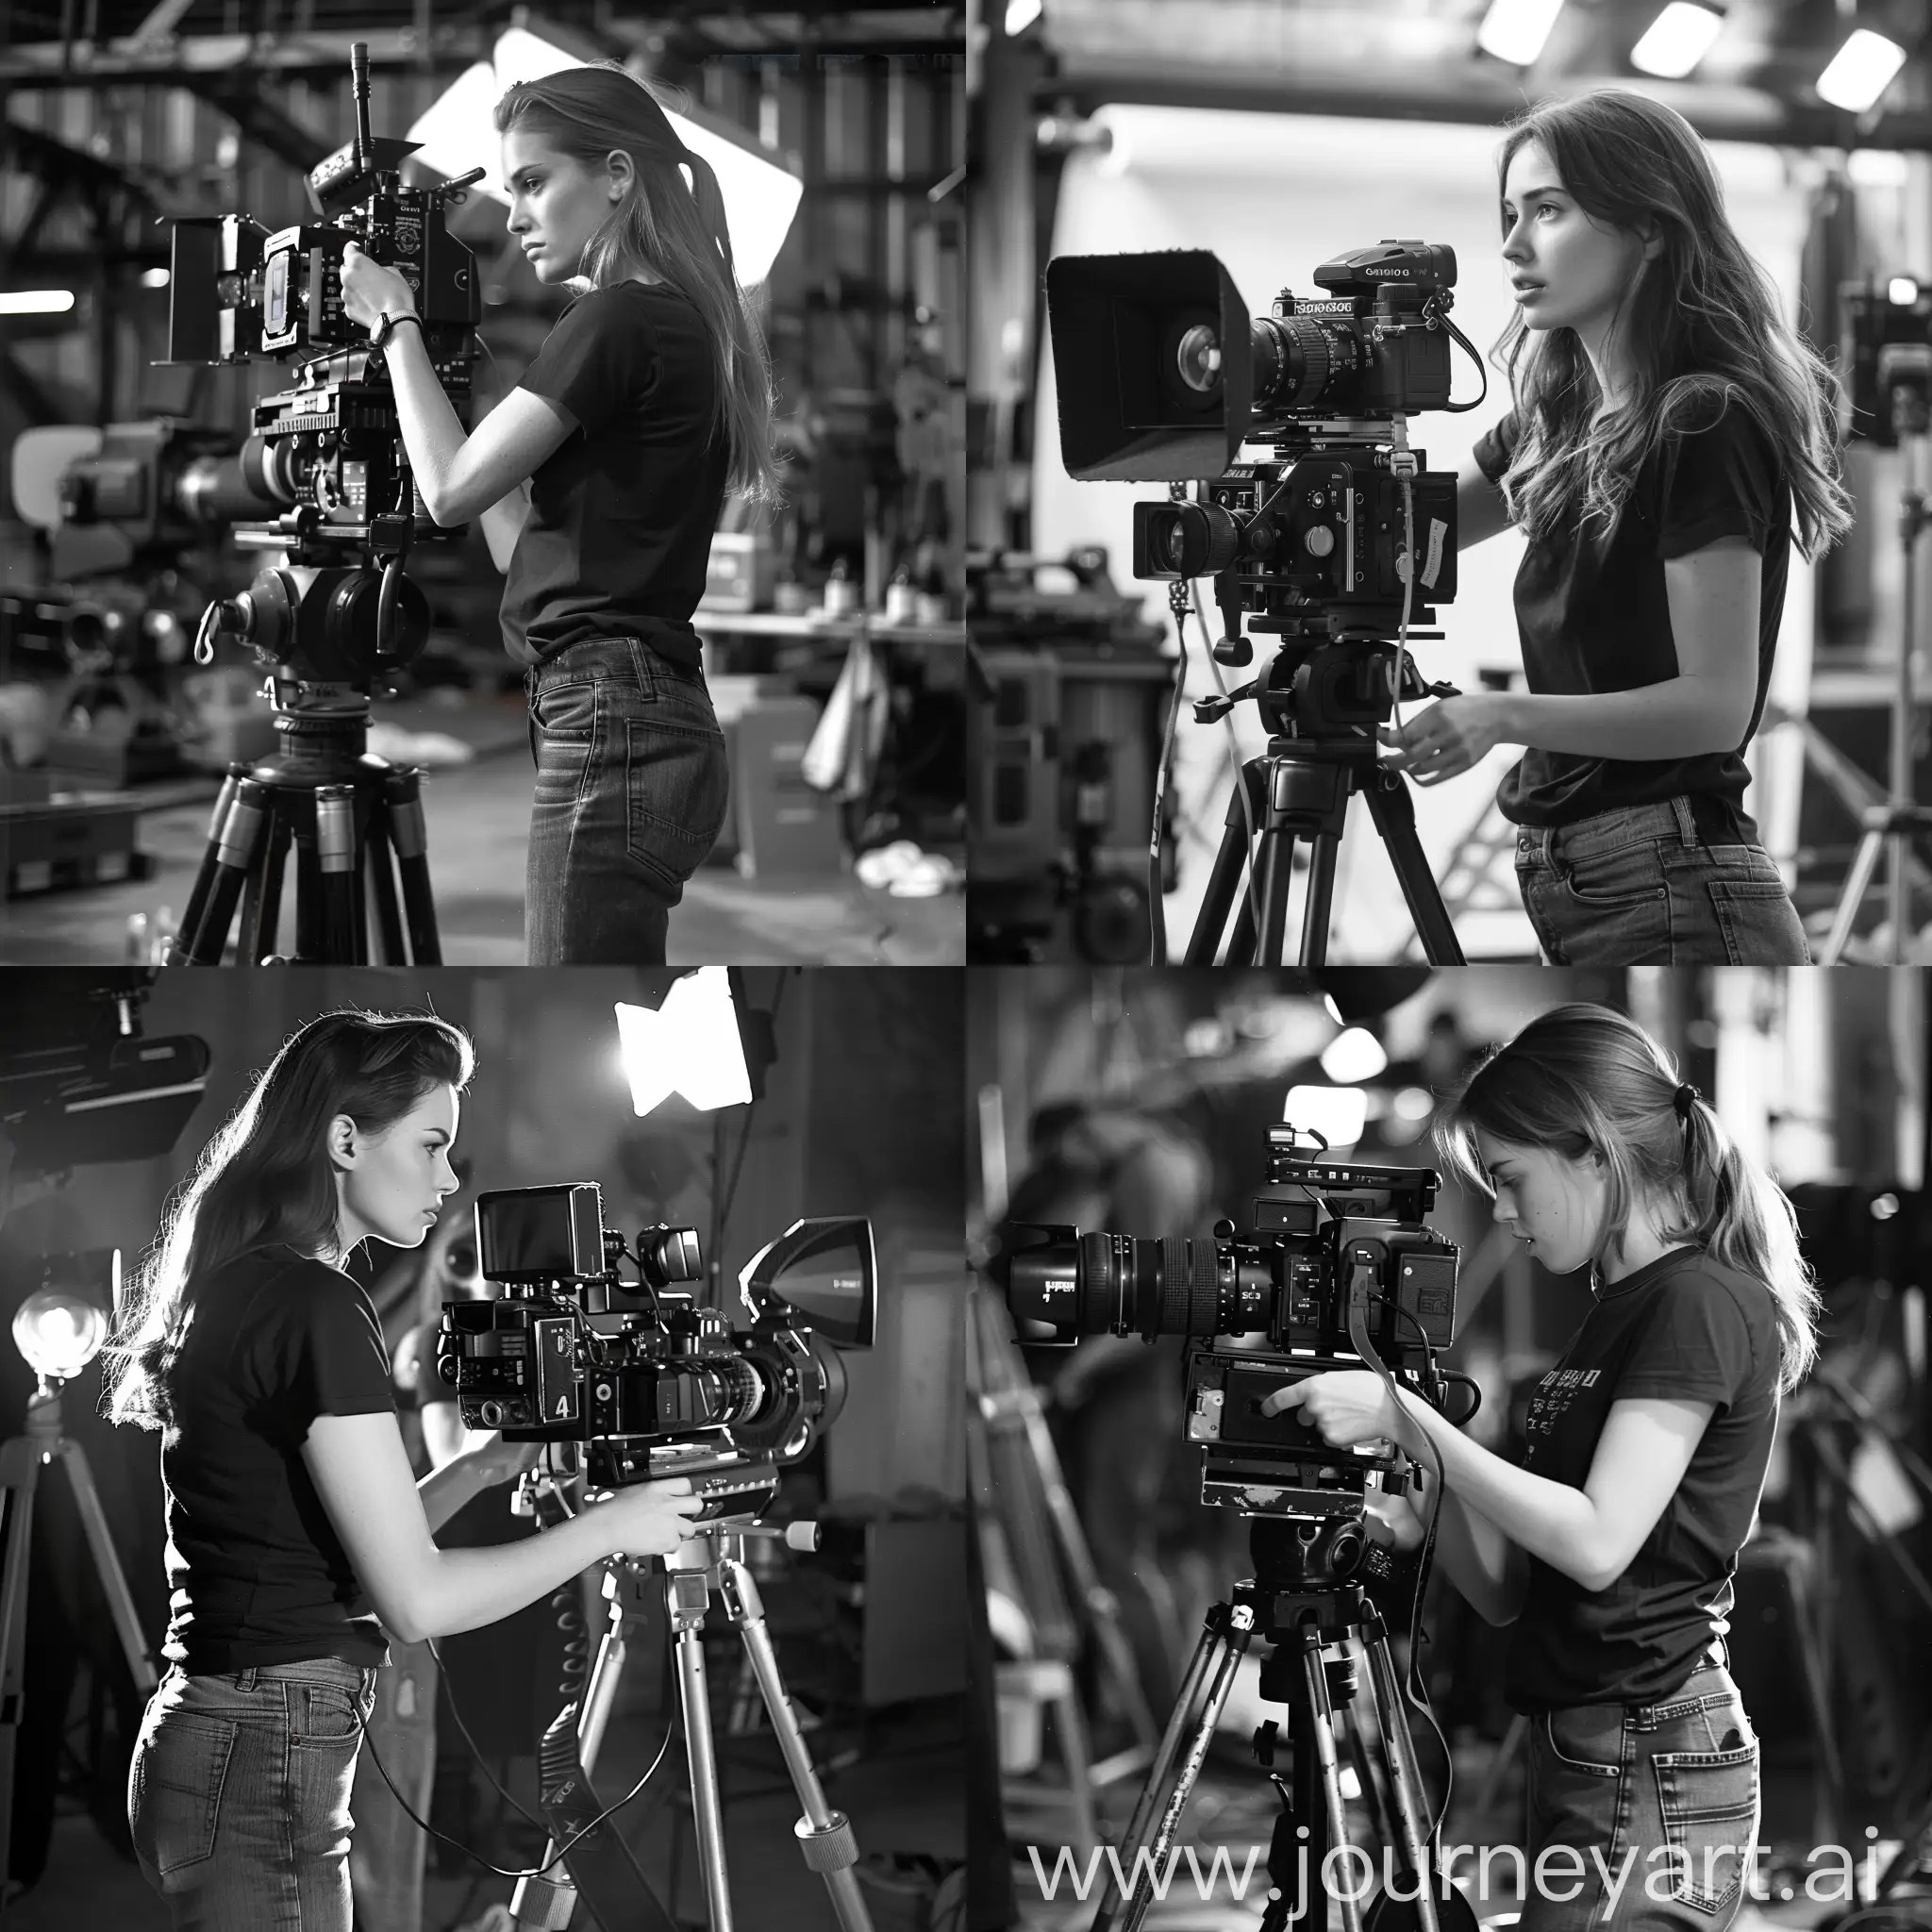 camera girl, brunette with white skin, stands and films with a movie camera on the set, she is of average build, wearing a black T-shirt and jeans. The photo was taken with a 35 mm camera. medium plan.